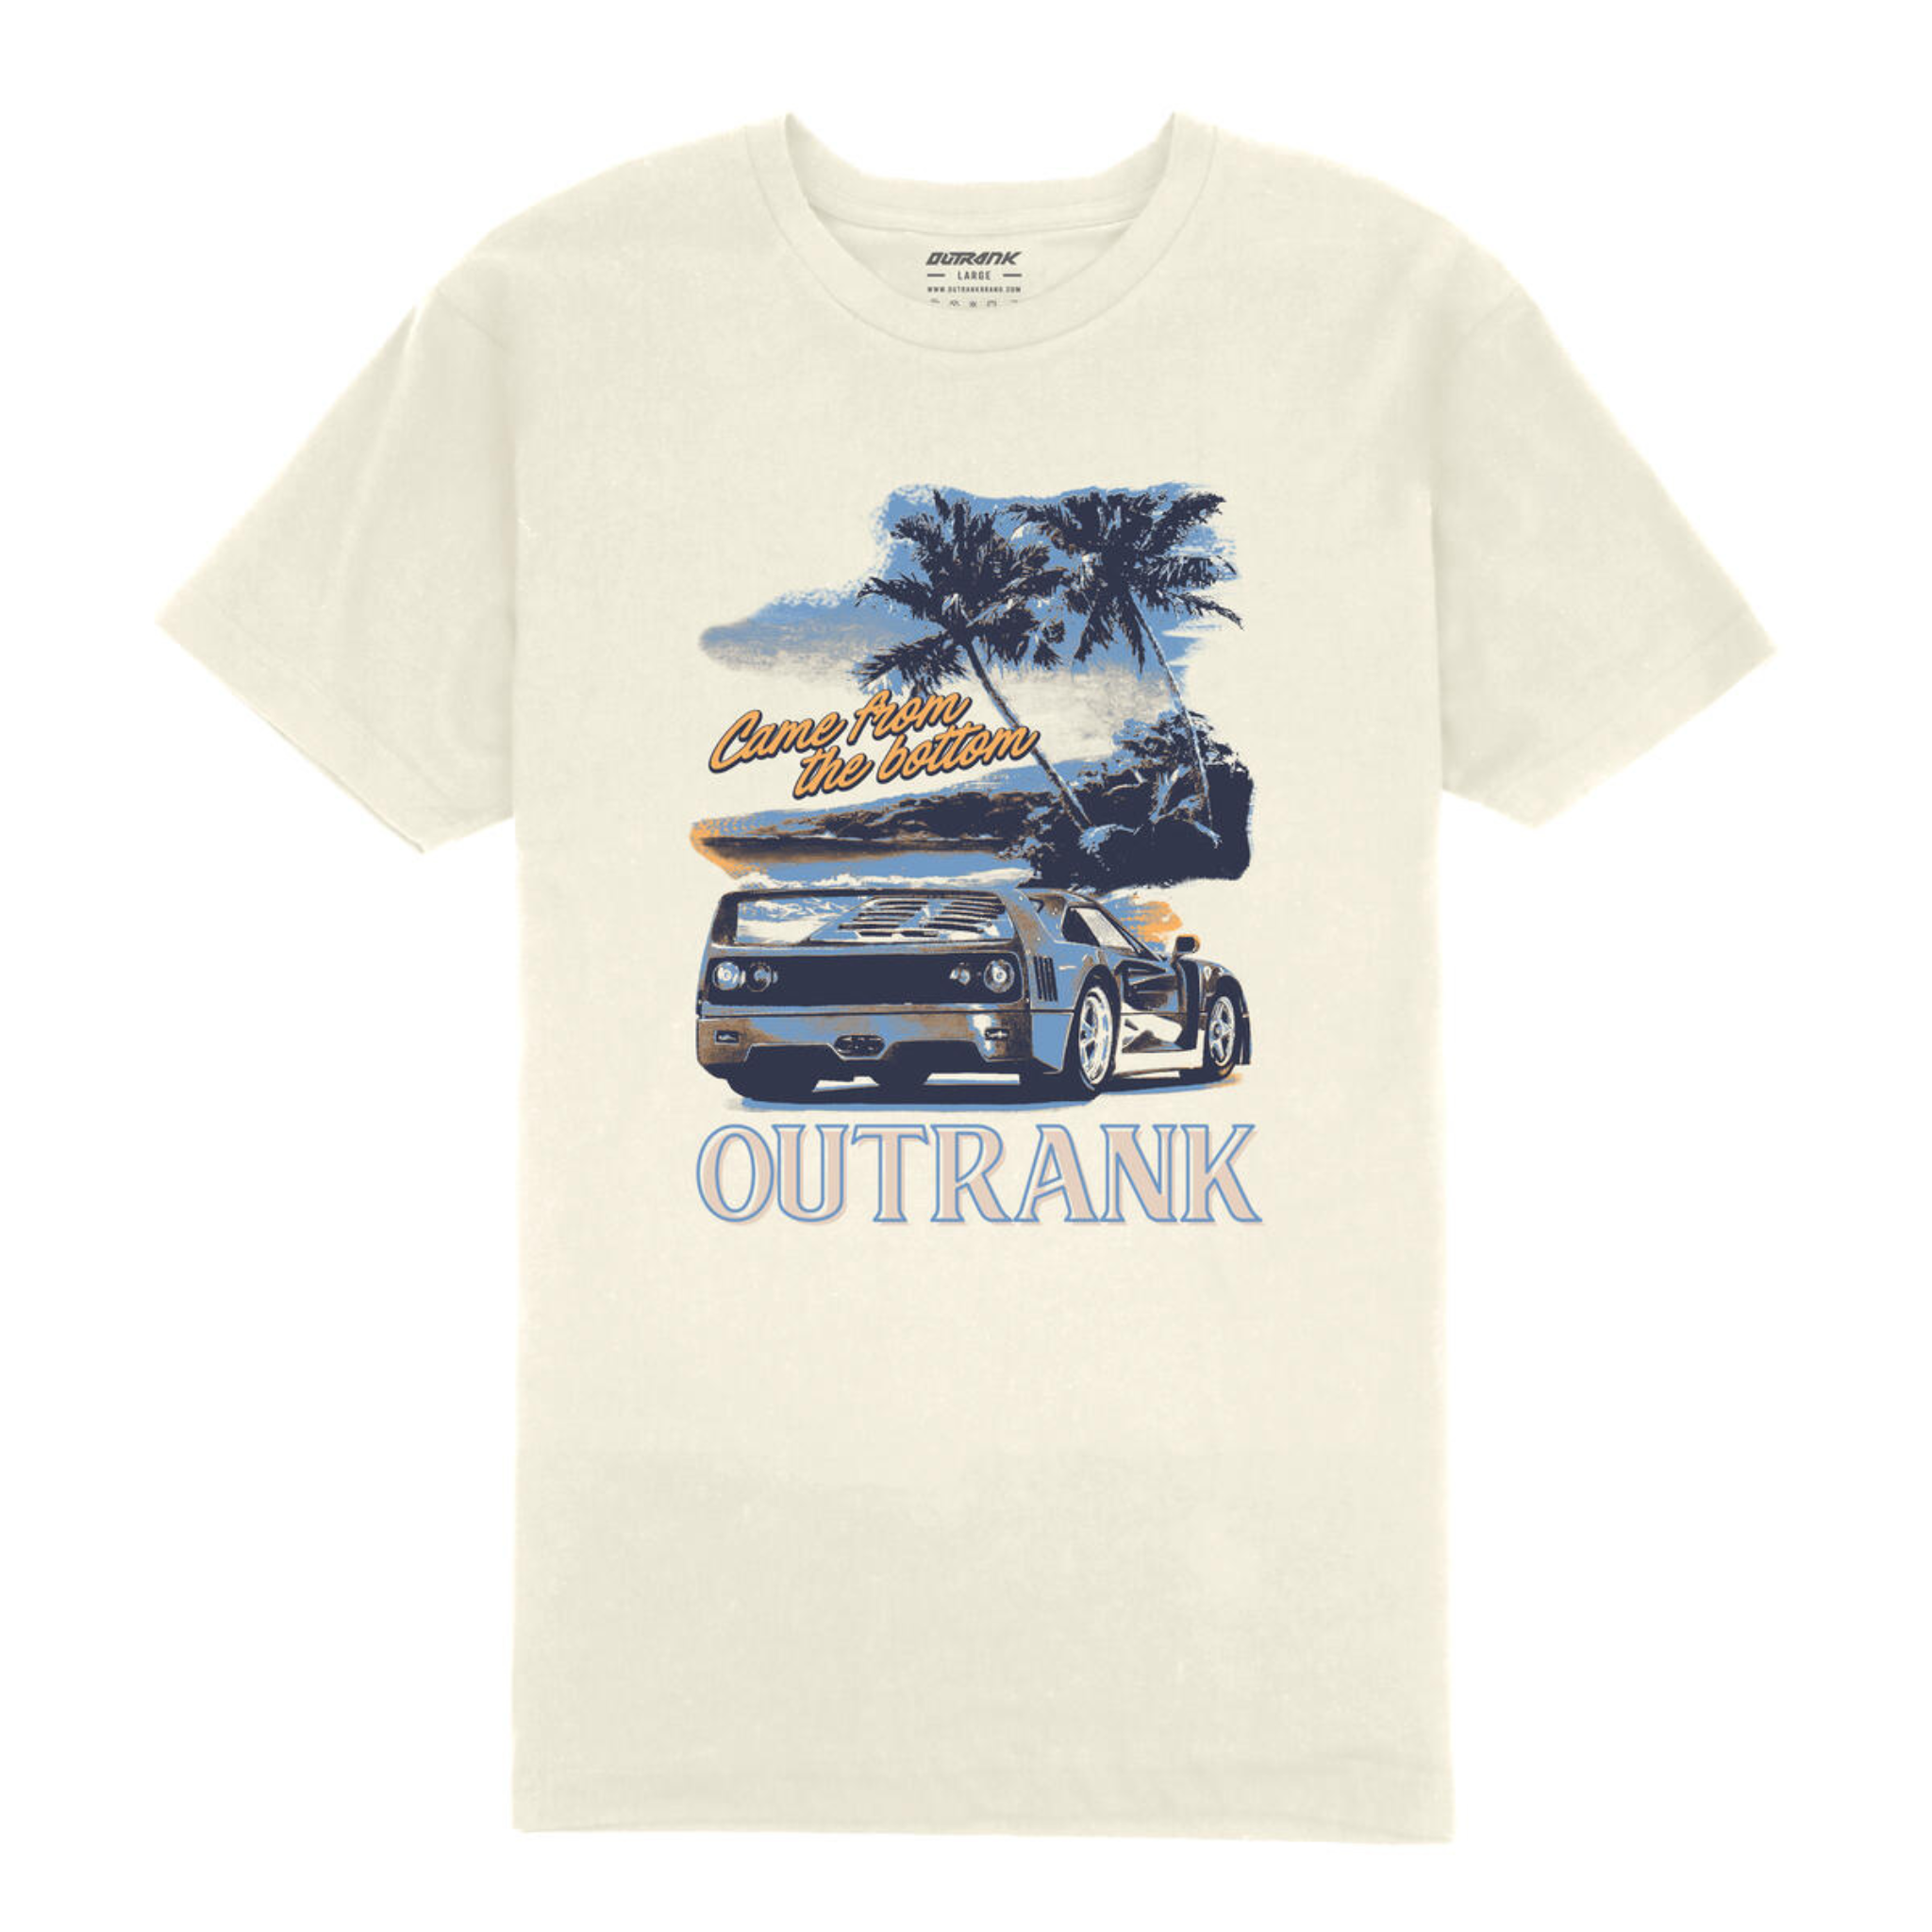 Outrank Came From The Bottom T-Shirt (Vintage White)